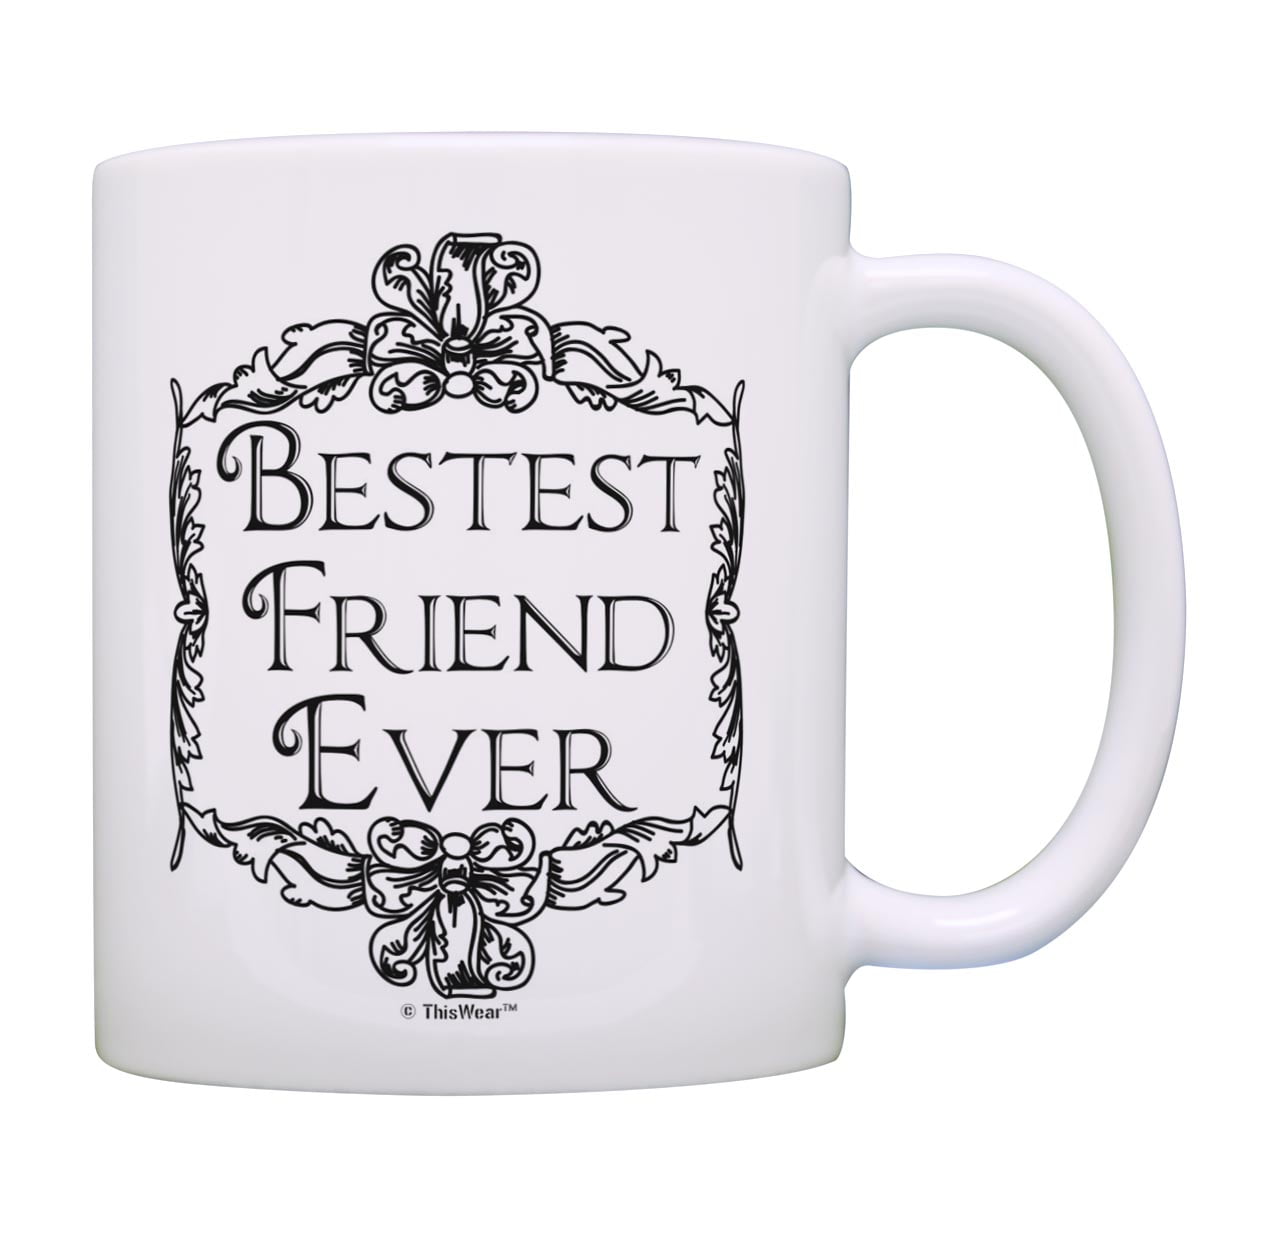 ThisWear Best Friends Gifts Best Friends are Like Chubby Thighs They Stick  Together Funny Gifts for Best Friend Birthday 11 ounce 2 Pack Coffee Mugs